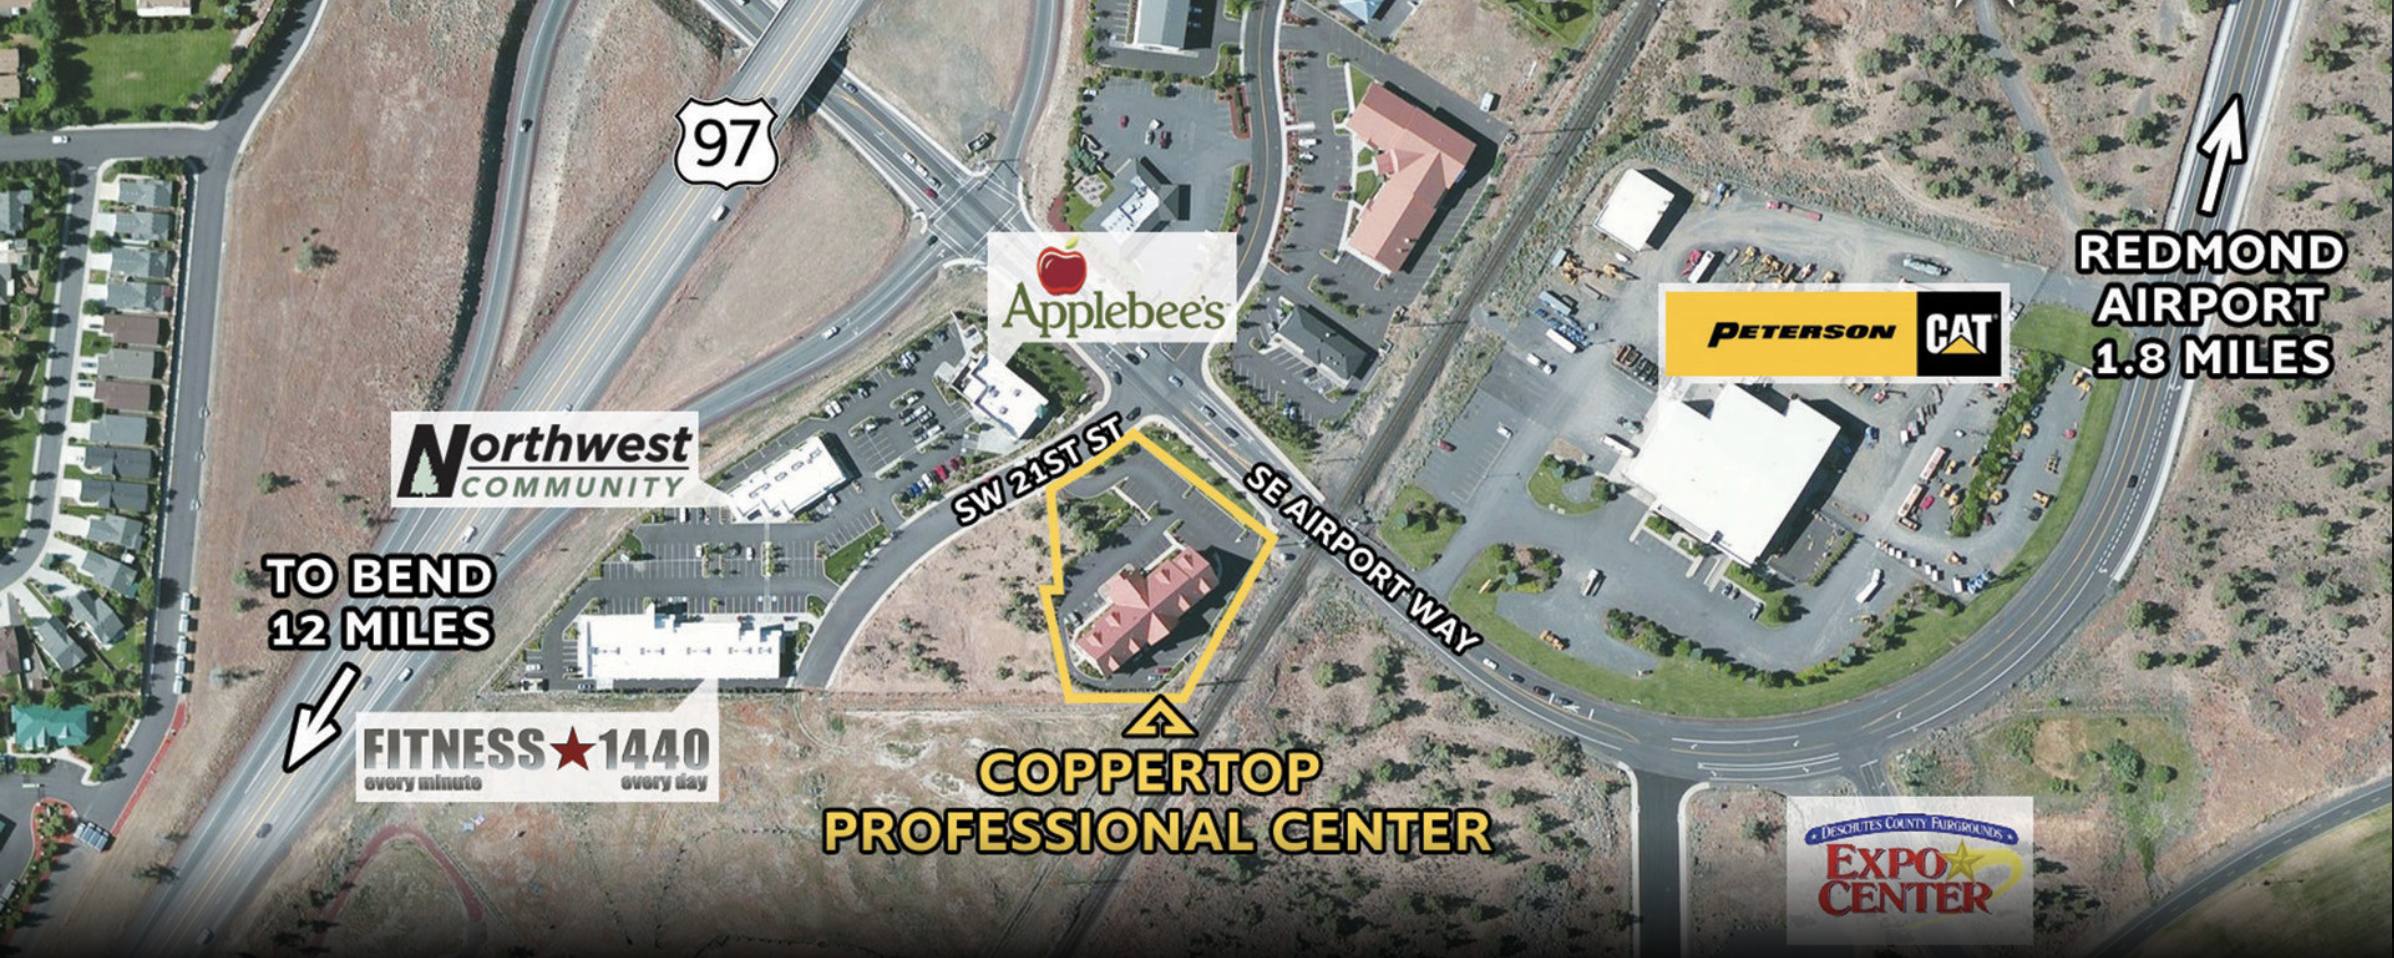 Coppertop Location.png